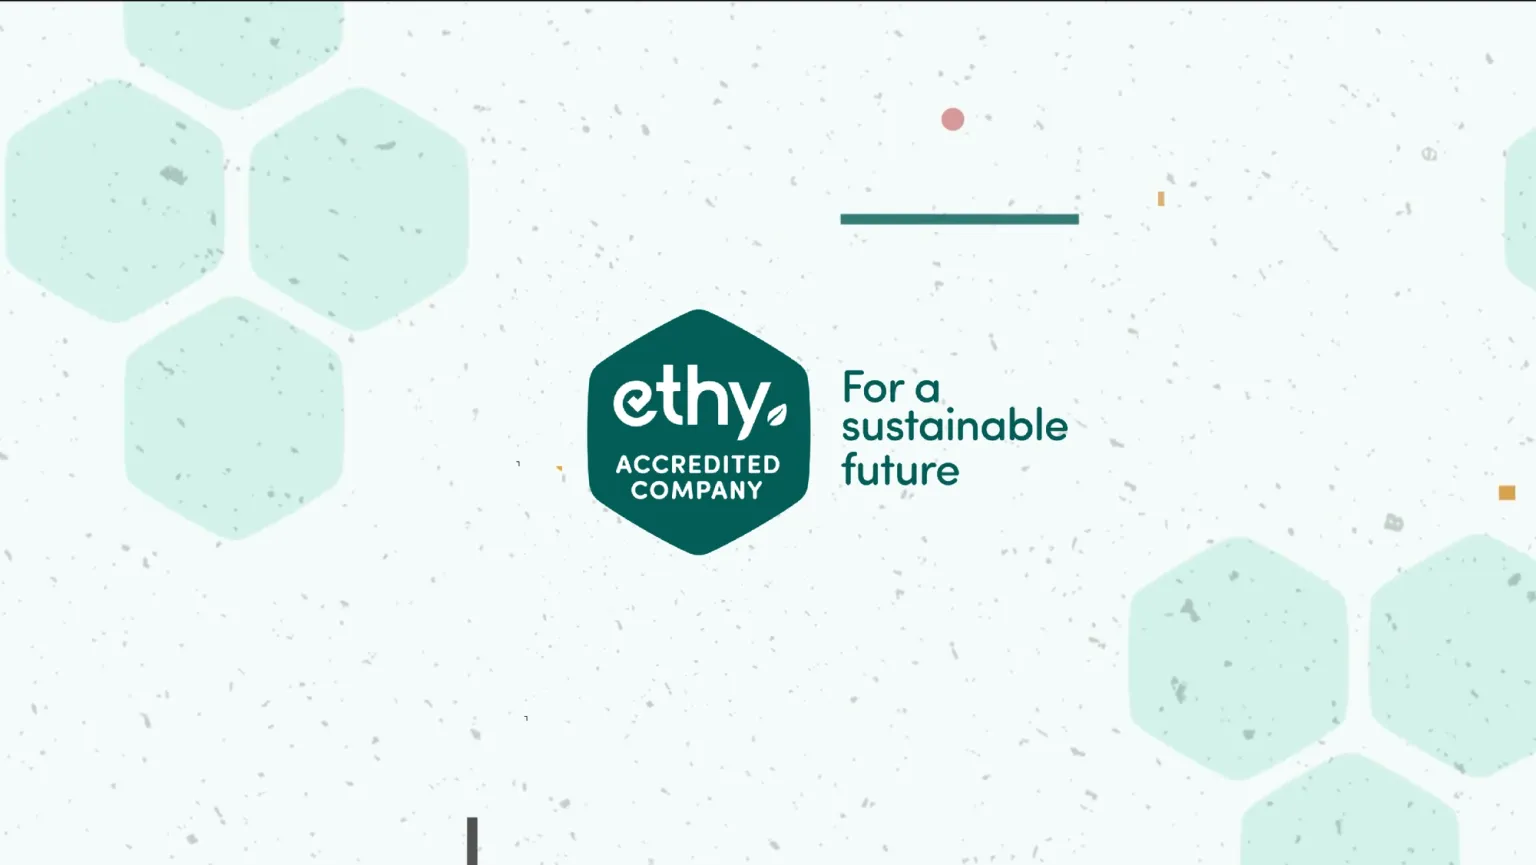 ethy verified brands can demonstrate their commitment for a more sustainable future using ethy accreditation mark. Only companies that have successfully passed ethy's accreditation assessment are permitted to use the accreditation mark.